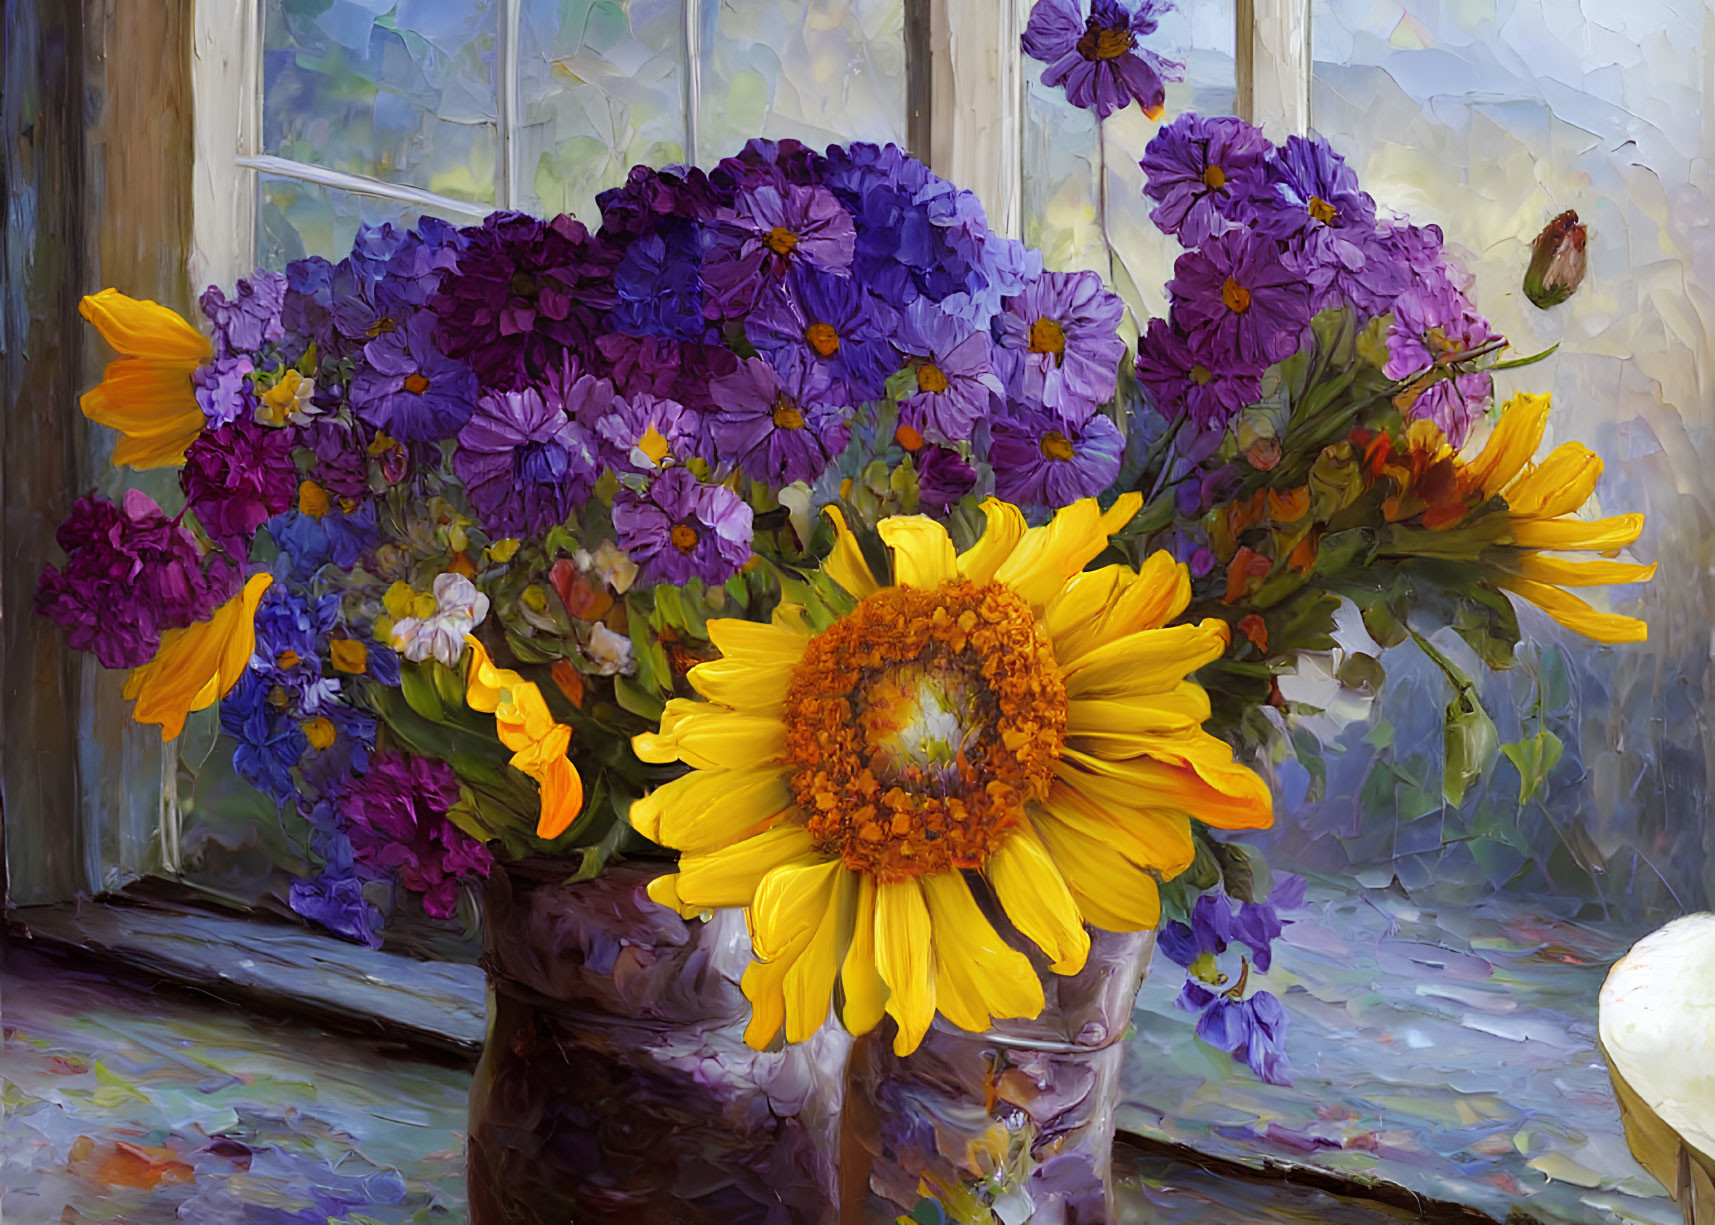 Colorful Flower Vase Painting with Sunflower, Purple Blooms, and Butterfly